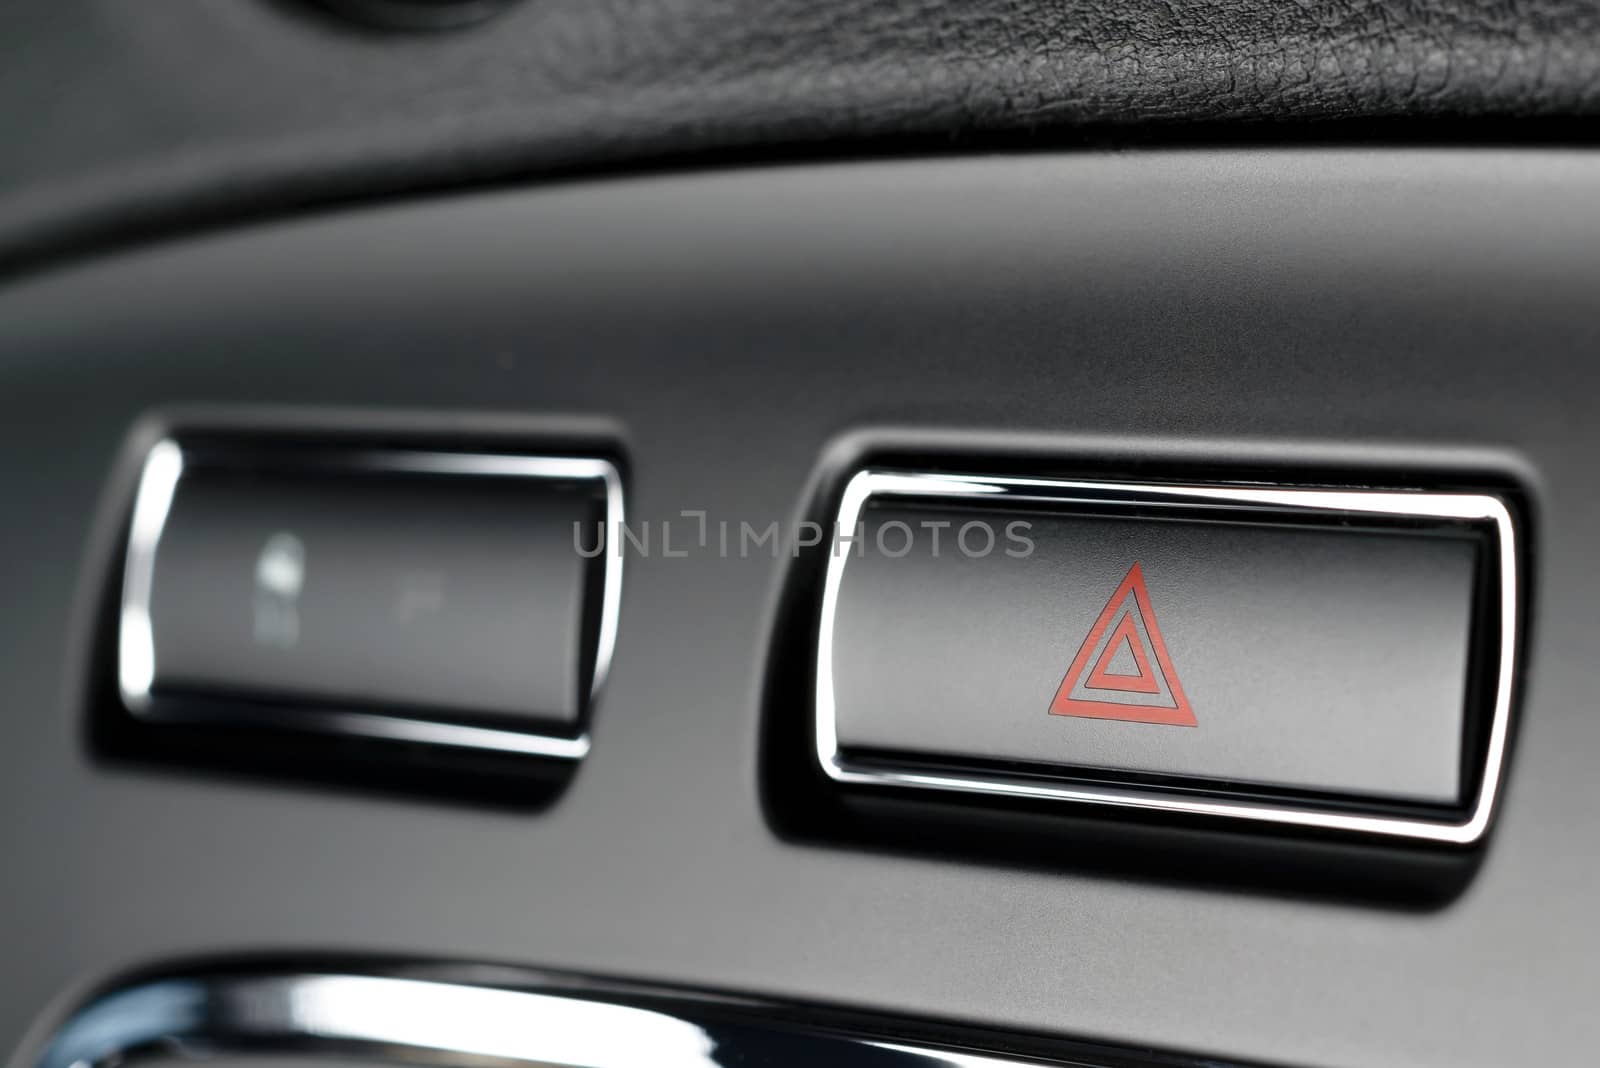 Button of vehicle, car hazard warning flashers button with visible red triangle, visible  fragment of control panel, visible red triangle emergency symbol.